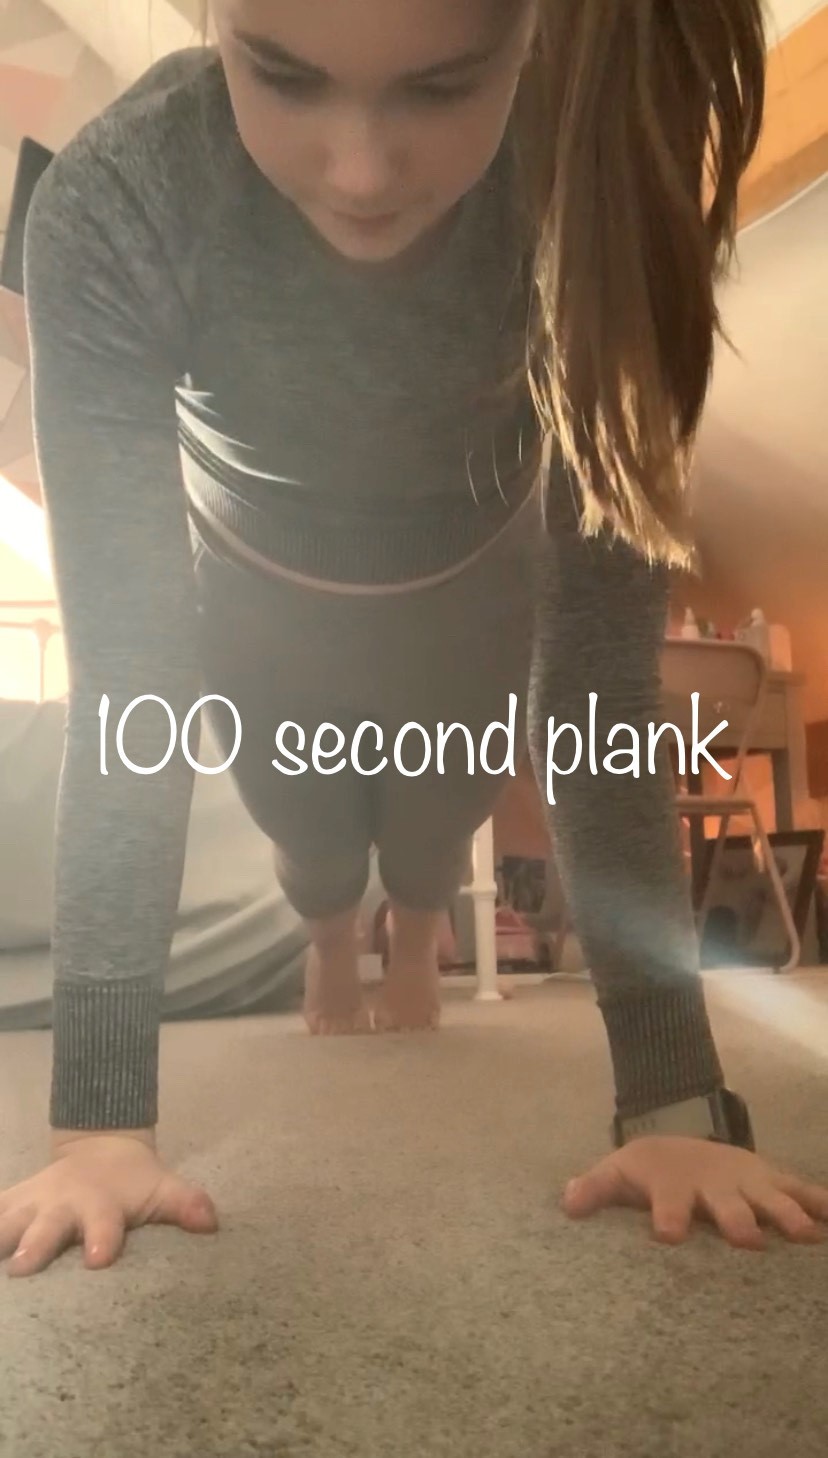 POISED: 100 second plank